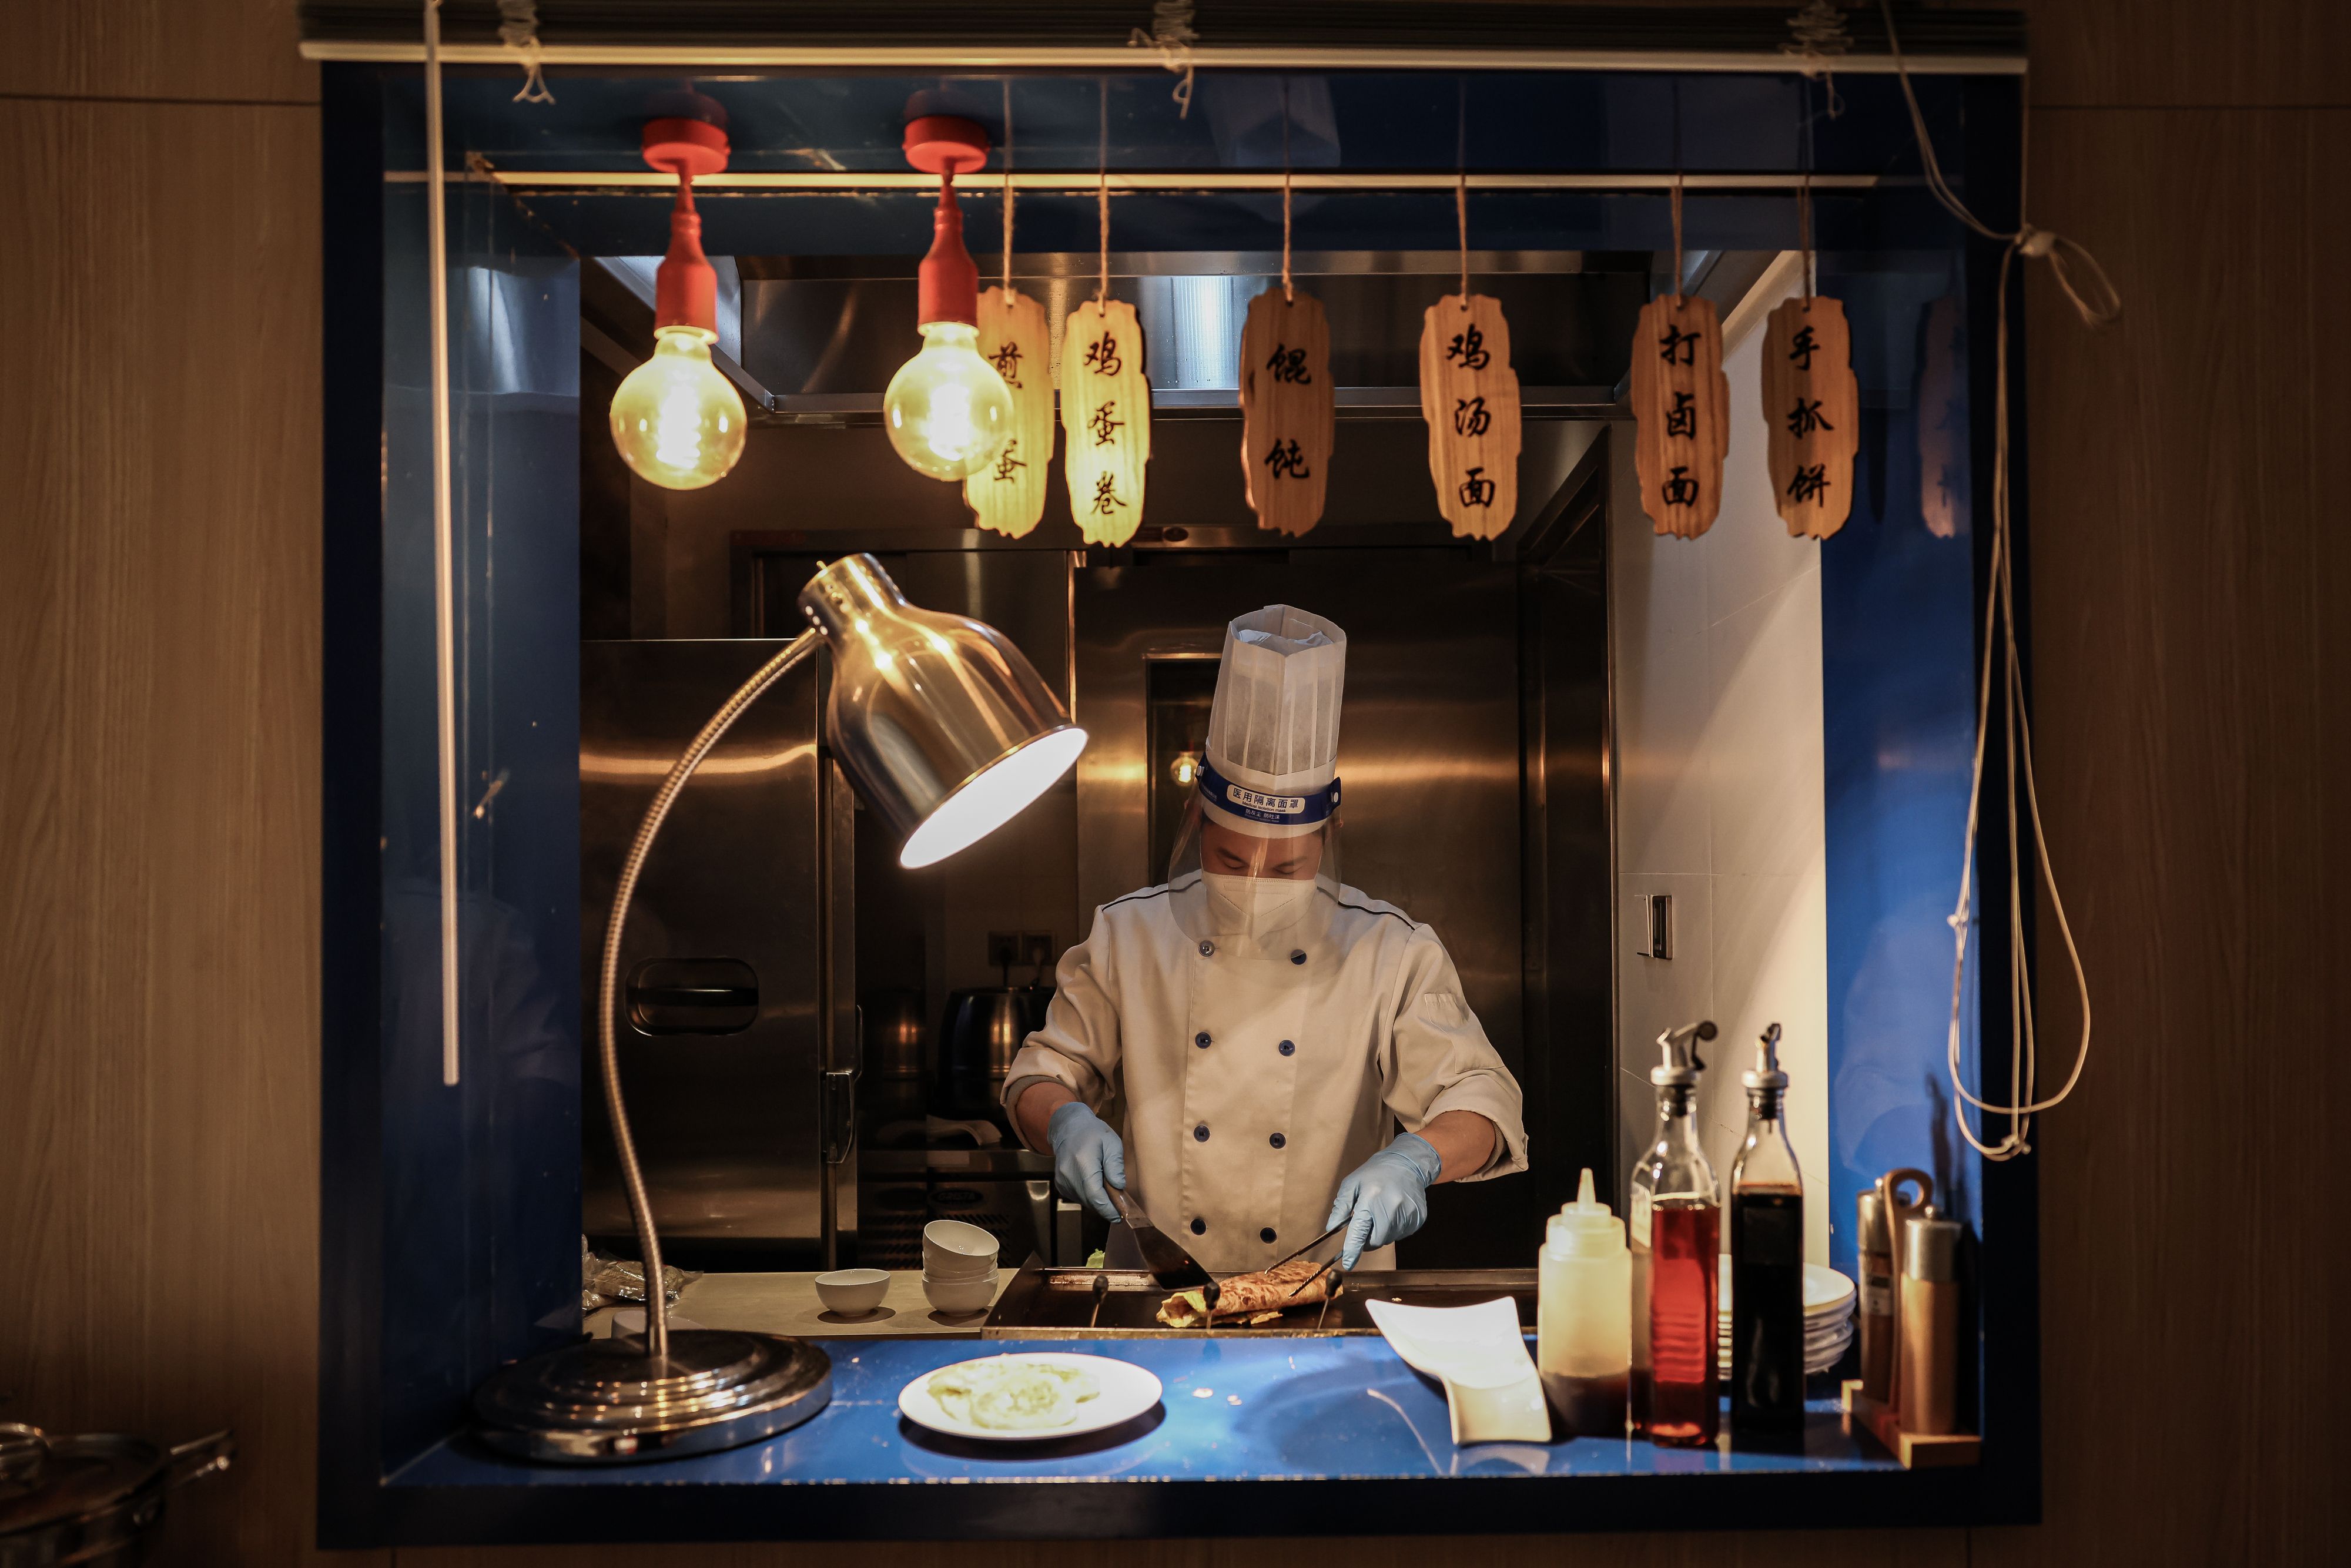 A chef wears a protective face mask with a shield as he prepares breakfast at a hotel in the closed loop on February 04, 2022 in Beijing, China.